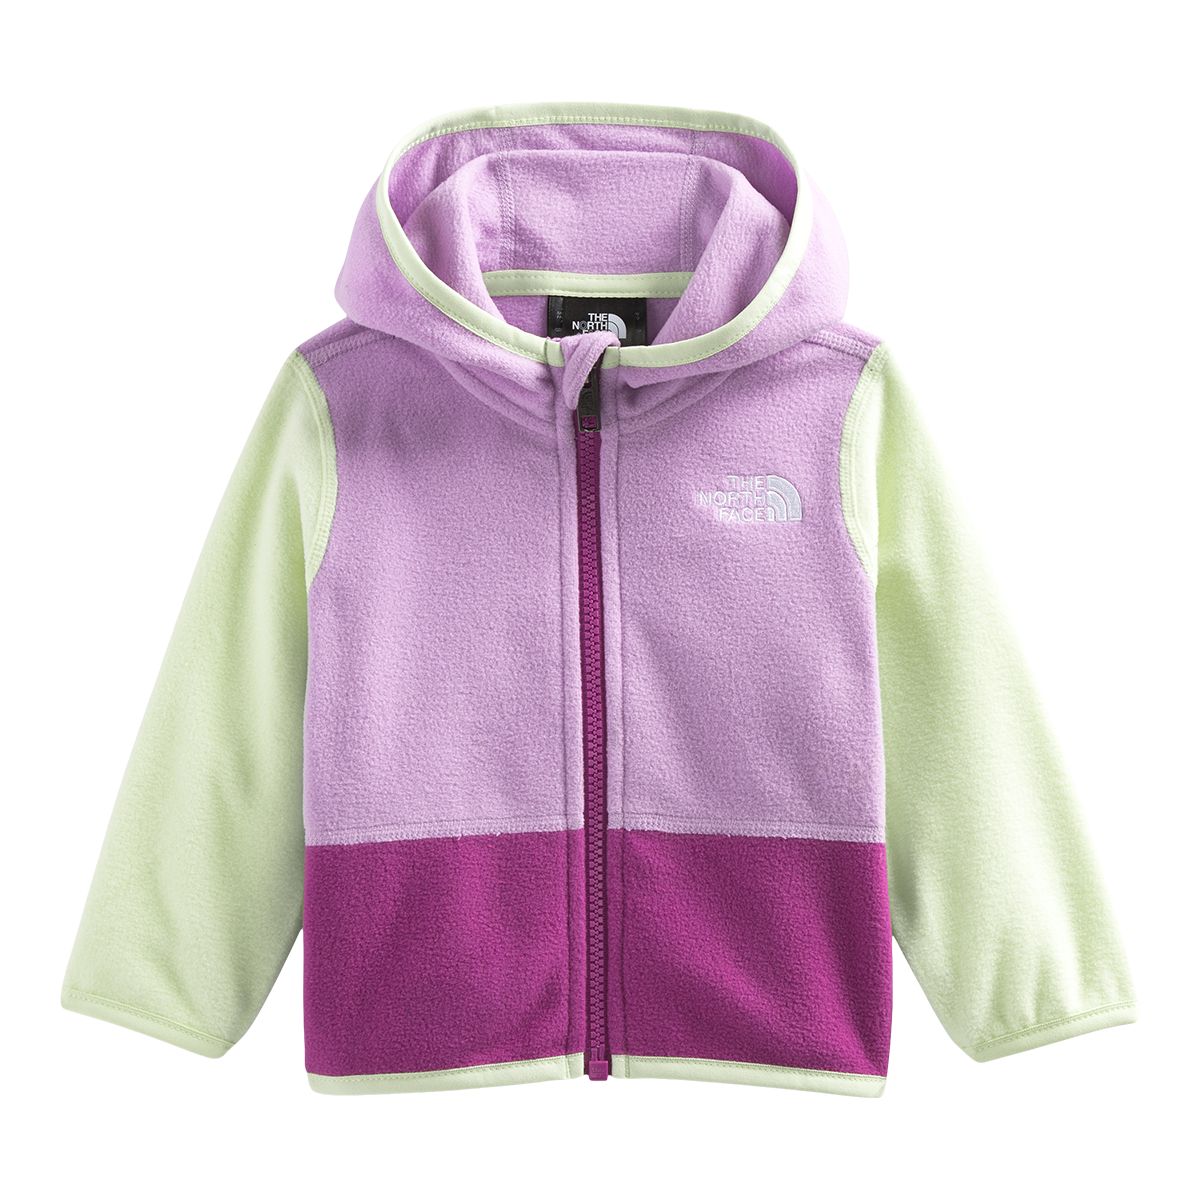 Image of The North Face Toddler Girls' Glacier Full Zip Hoodie